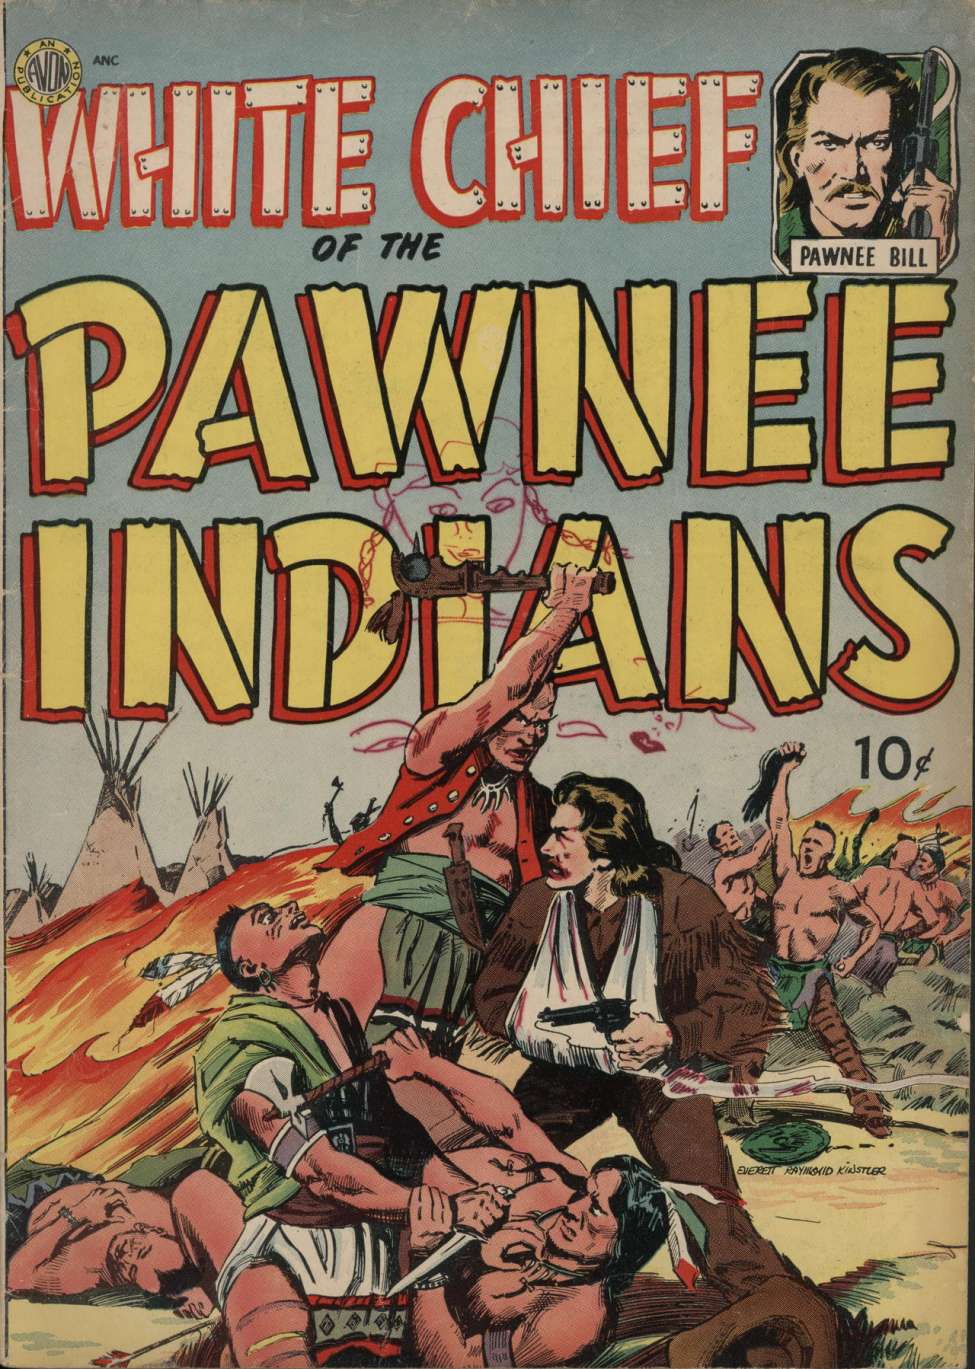 Book Cover For White Chief Of The Pawnee Indians